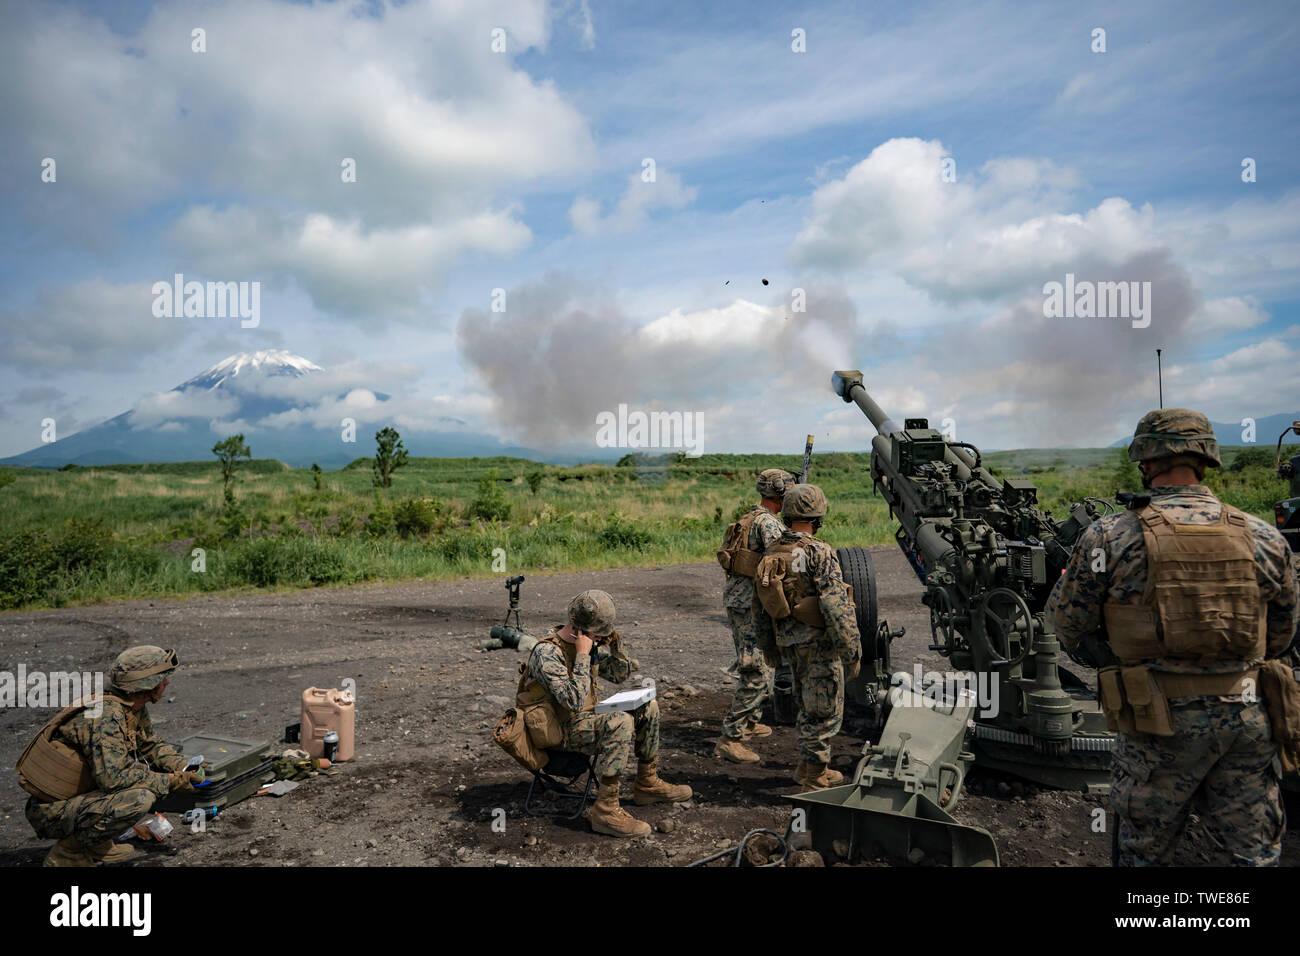 U.S. Marines with India Battery, 3rd Battalion,12th Marine Regiment, fire an M777 Howitzer during Exercise Fuji Viper, at Combined Arms Training Center, Camp Fuji, June 14, 2019. The M777 uses a digital fire-control system to provide navigation, pointing and self-location, allowing it to be put into action quickly. (U.S. Marine Corps photo by Cpl. Esgar Rojas) Stock Photo